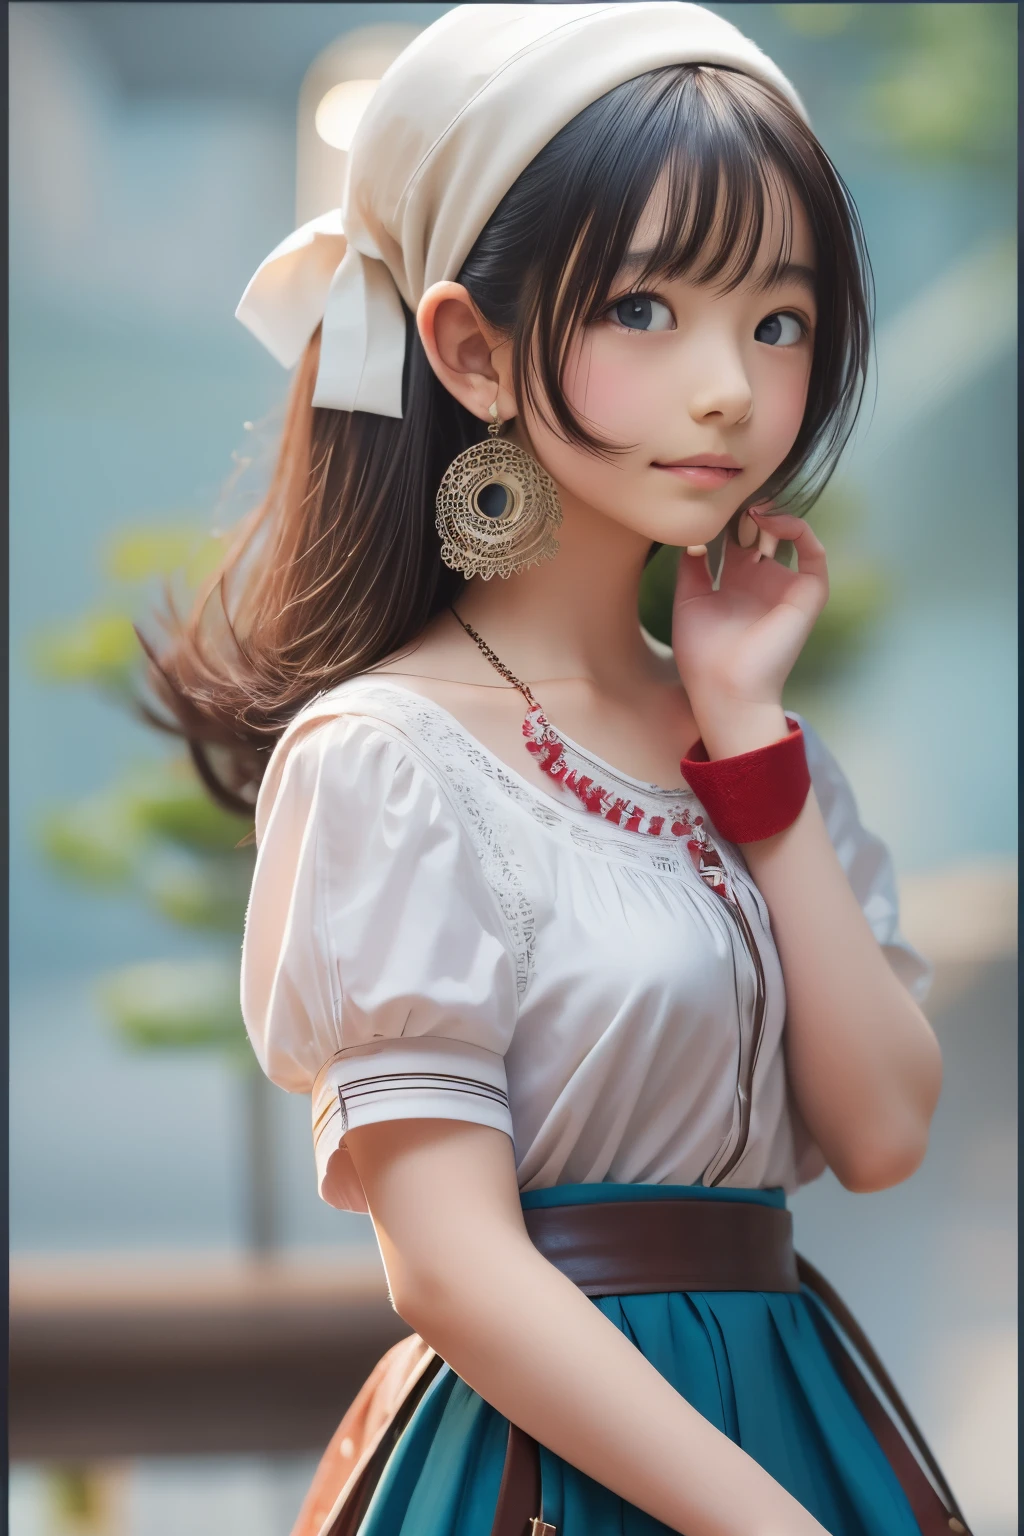 ((sfw: 1.4)), (sfw,She is wearing a long white embroidered skirt, a red blouse with lace, a white apron tied around her waist, blue socks, and brown leather shoes.A blue scarf is on her head. Yes, her accessories include necklaces, earrings, and bracelets. short hair, 1 Girl)), Ultra High Resolution, (Realistic: 1.4), RAW Photo, Best Quality, (Photorealistic Stick), Focus, Soft Light, ((15 years old)),  ((Japanese)), (( (young face))), (surface), (depth of field), masterpiece, (realistic), woman, bangs, ((1 girl))